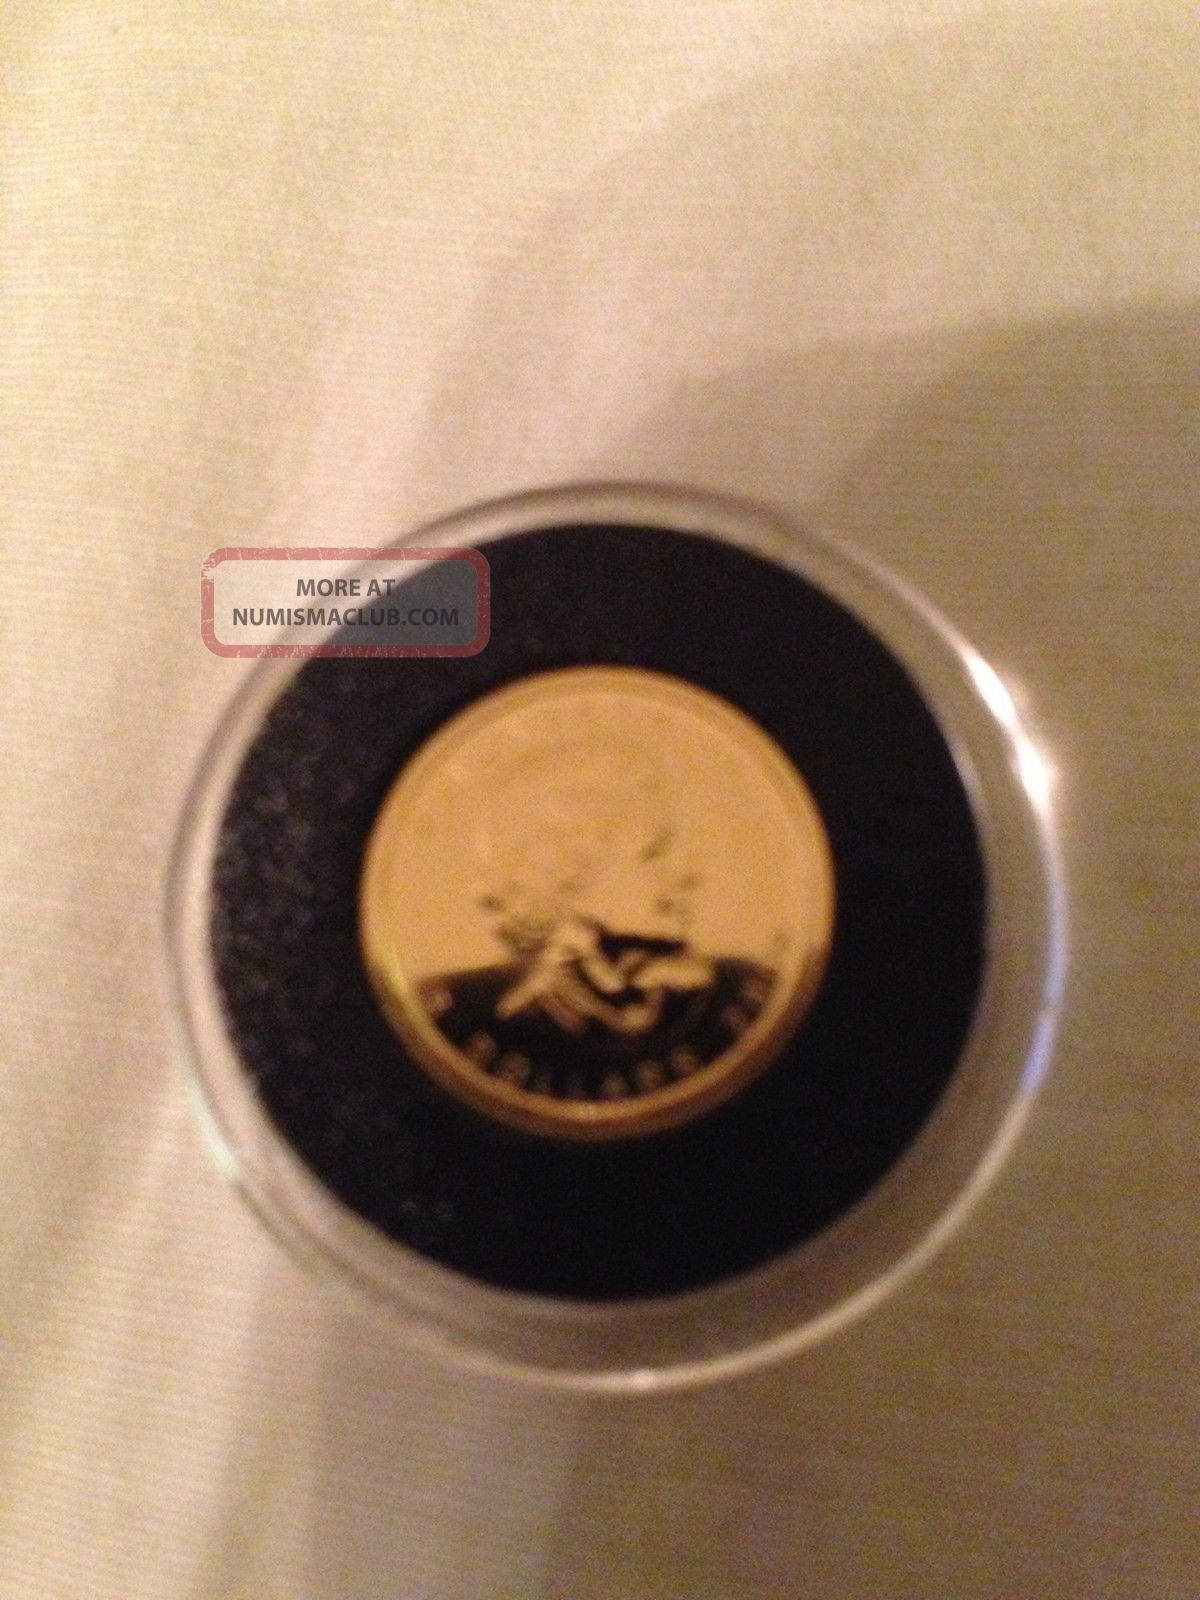 2009 1/10th Ounce Gold Maple Leaf (proof) Coins: Canada photo